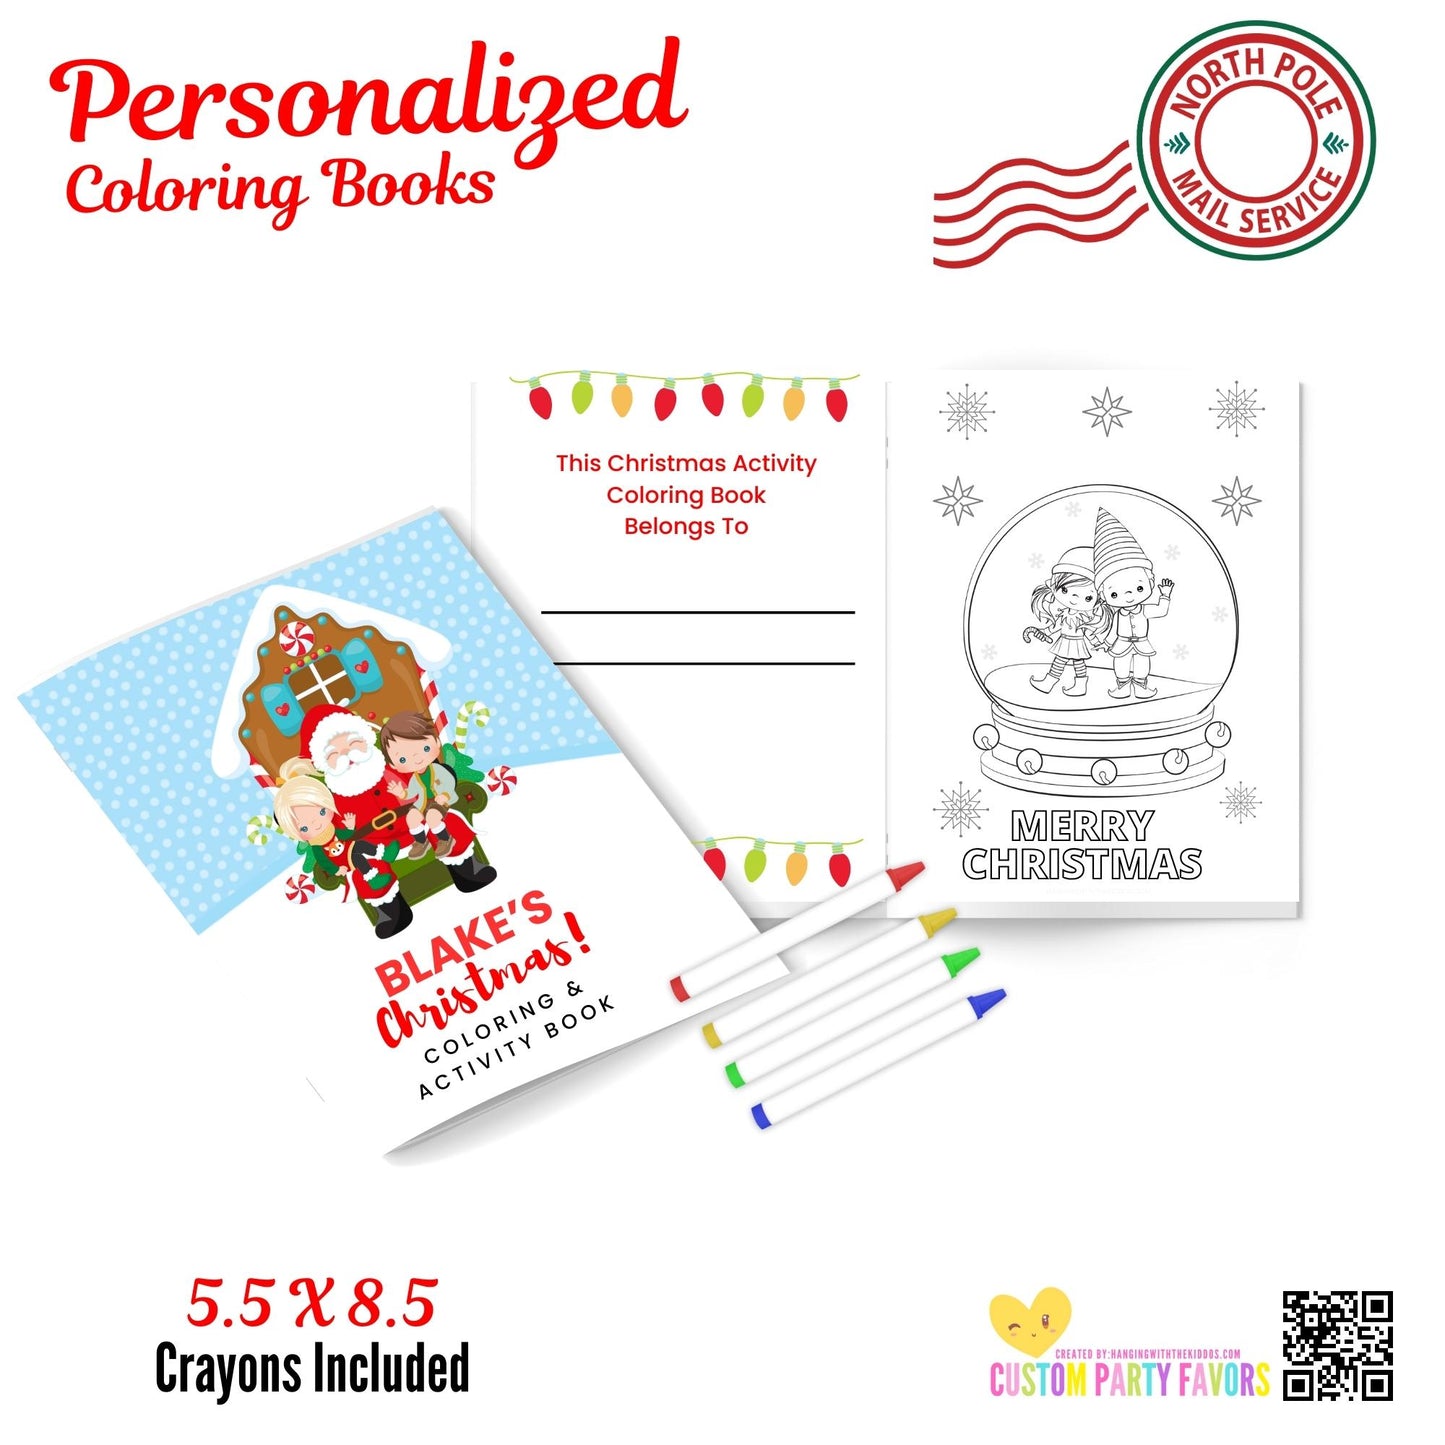 Personalized Christmas Coloring & Activity Books|03